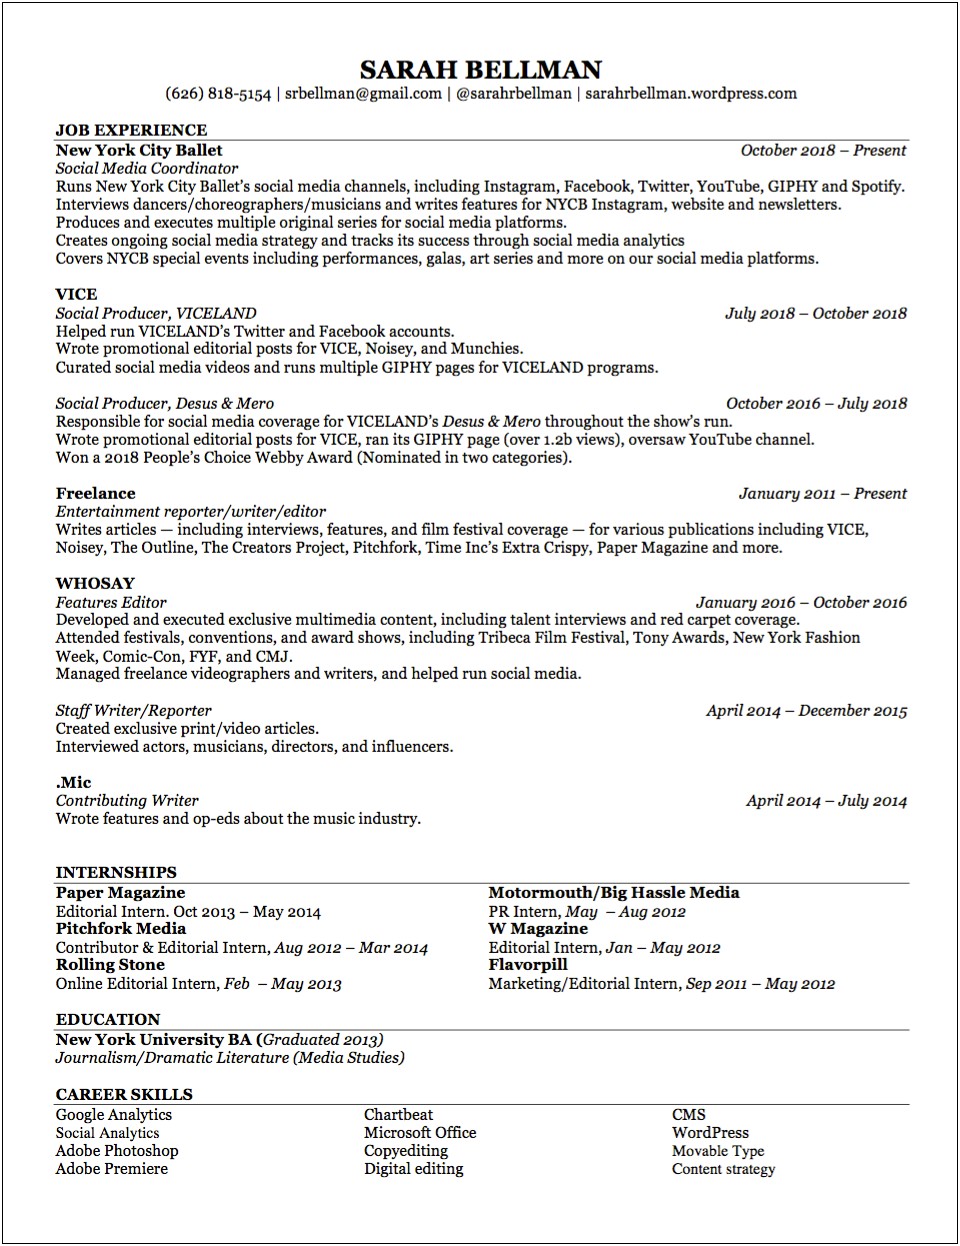 Where To Put References Upon Request On Resume